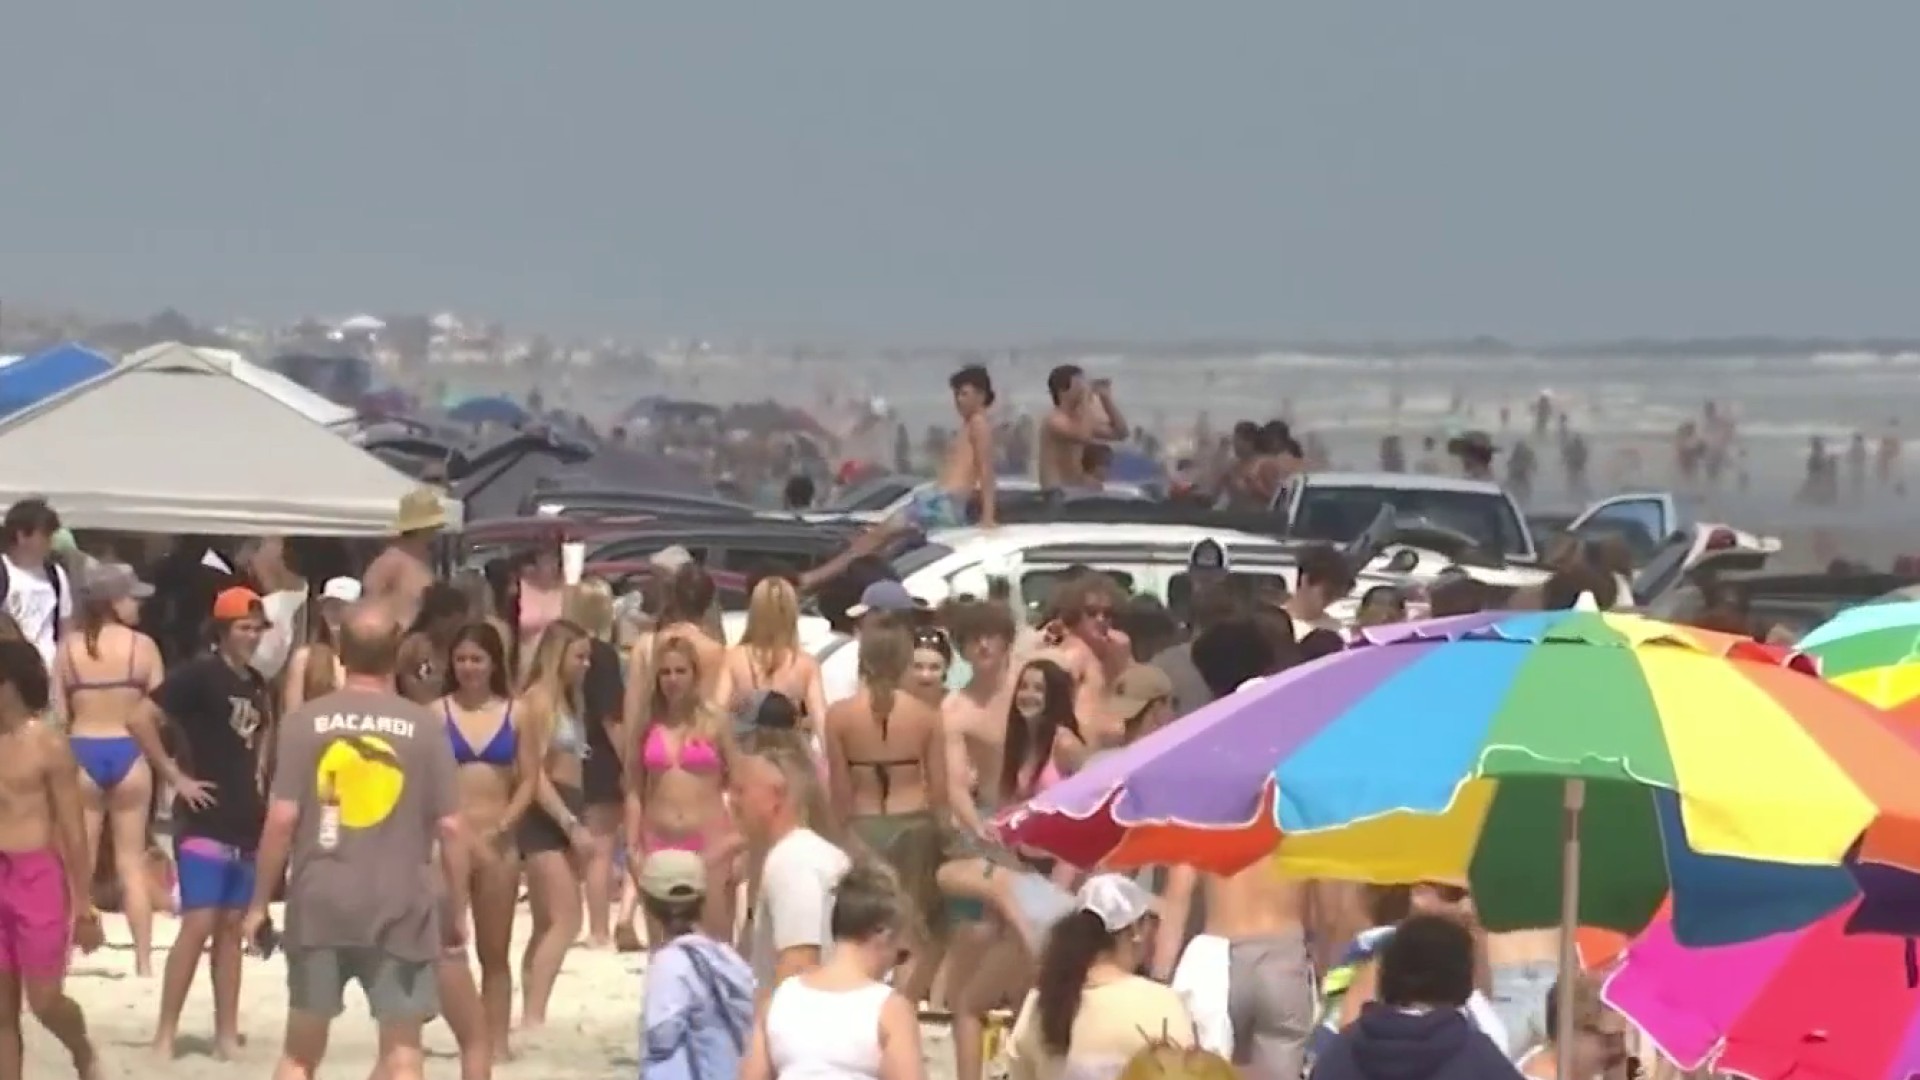 Beach Porn Youth - Miami Beach to impose curfew following fatal shootings during spring break